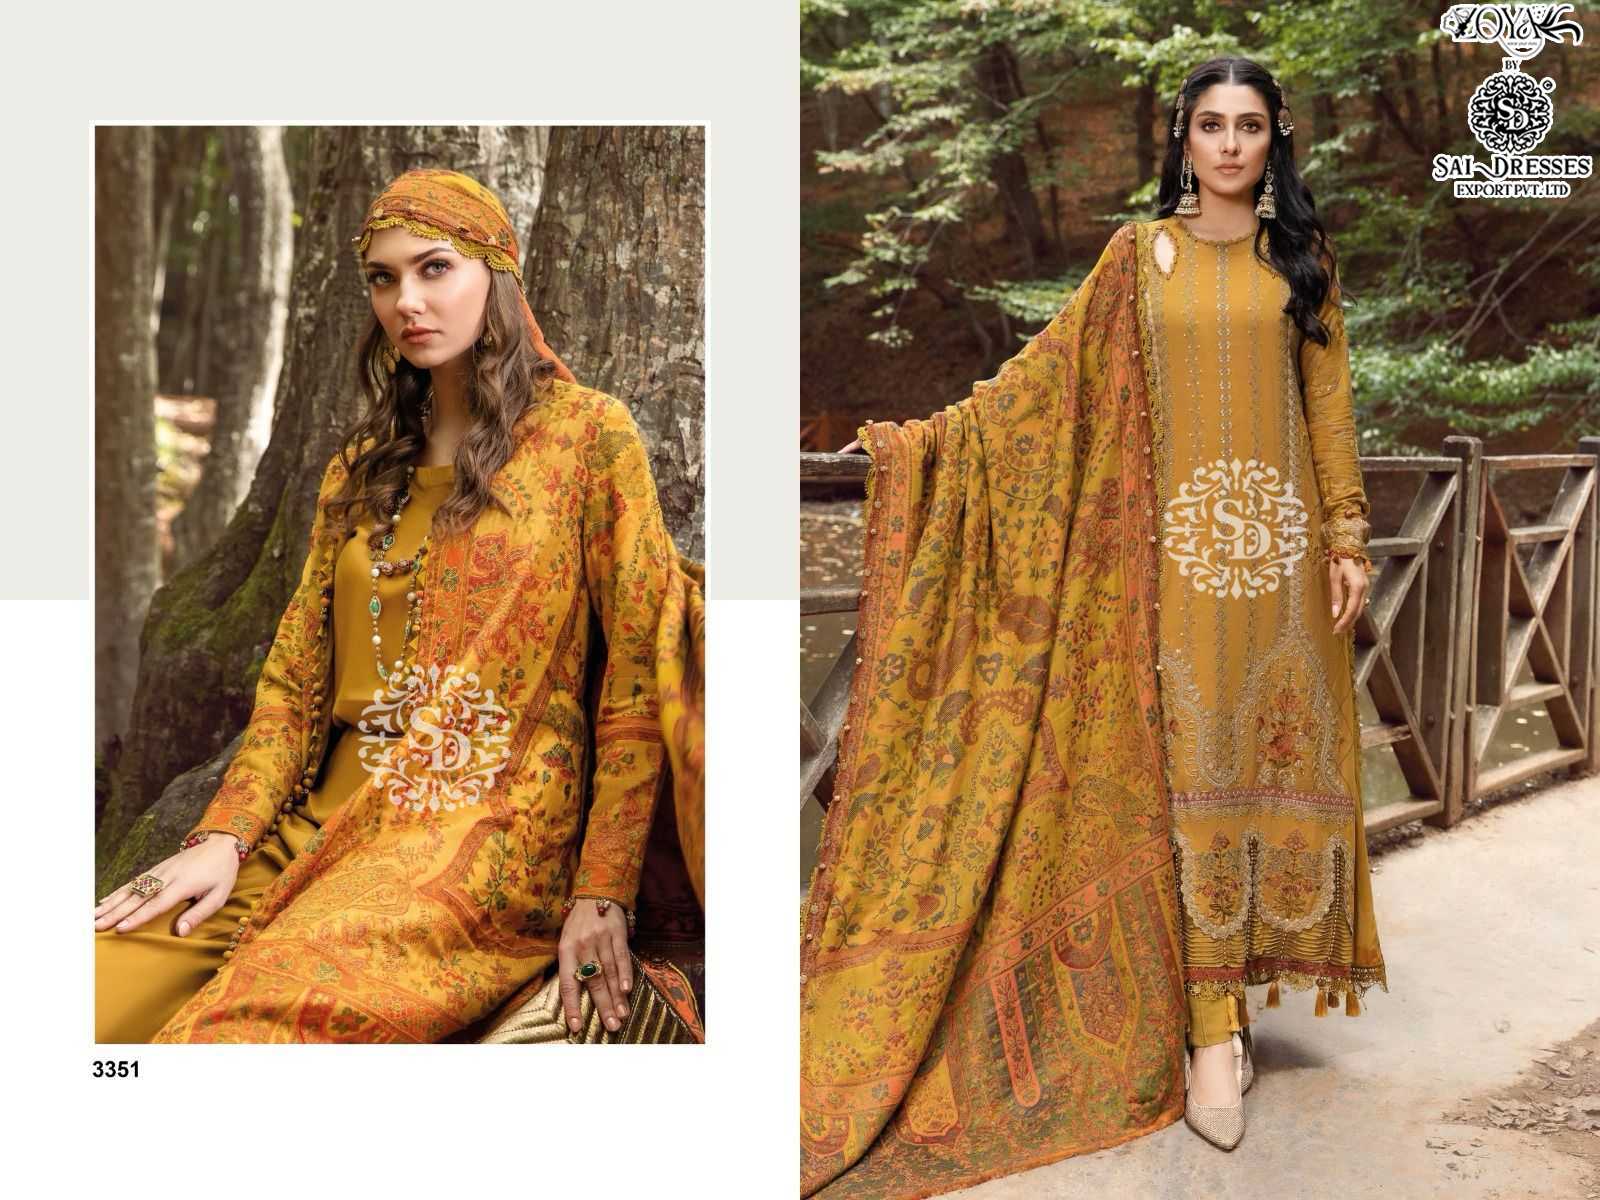 SAI DRESSES PRESENT MARIA B EMBROIDERED 24 FESTIVE WEAR REYON COTTON WITH HEAVY SELF EMBROIDERED PAKISTANI DESIGNER SUITS IN WHOLESALE RATE IN SURAT